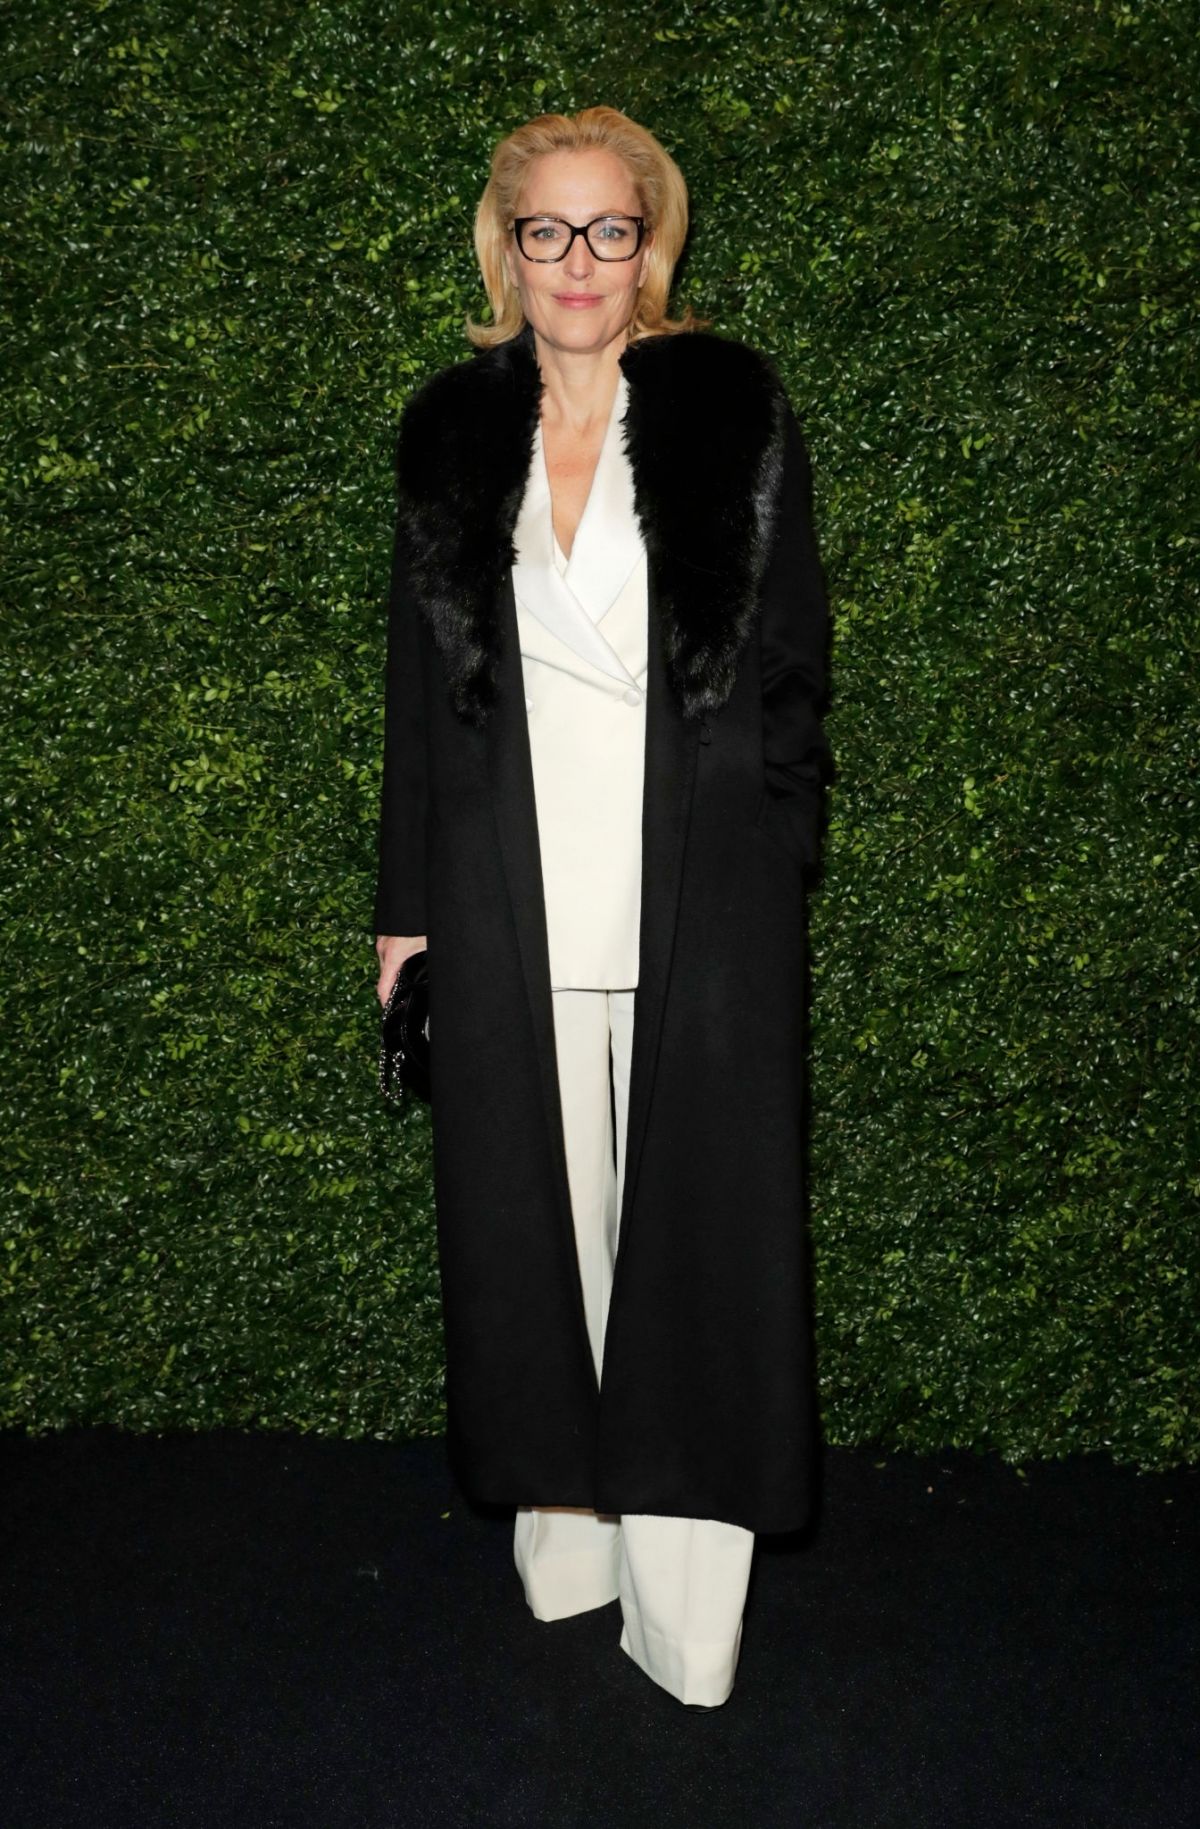 gillian-anderson-attends-2020-charles-finch-and-chanel-pre-bafta-party-in-london